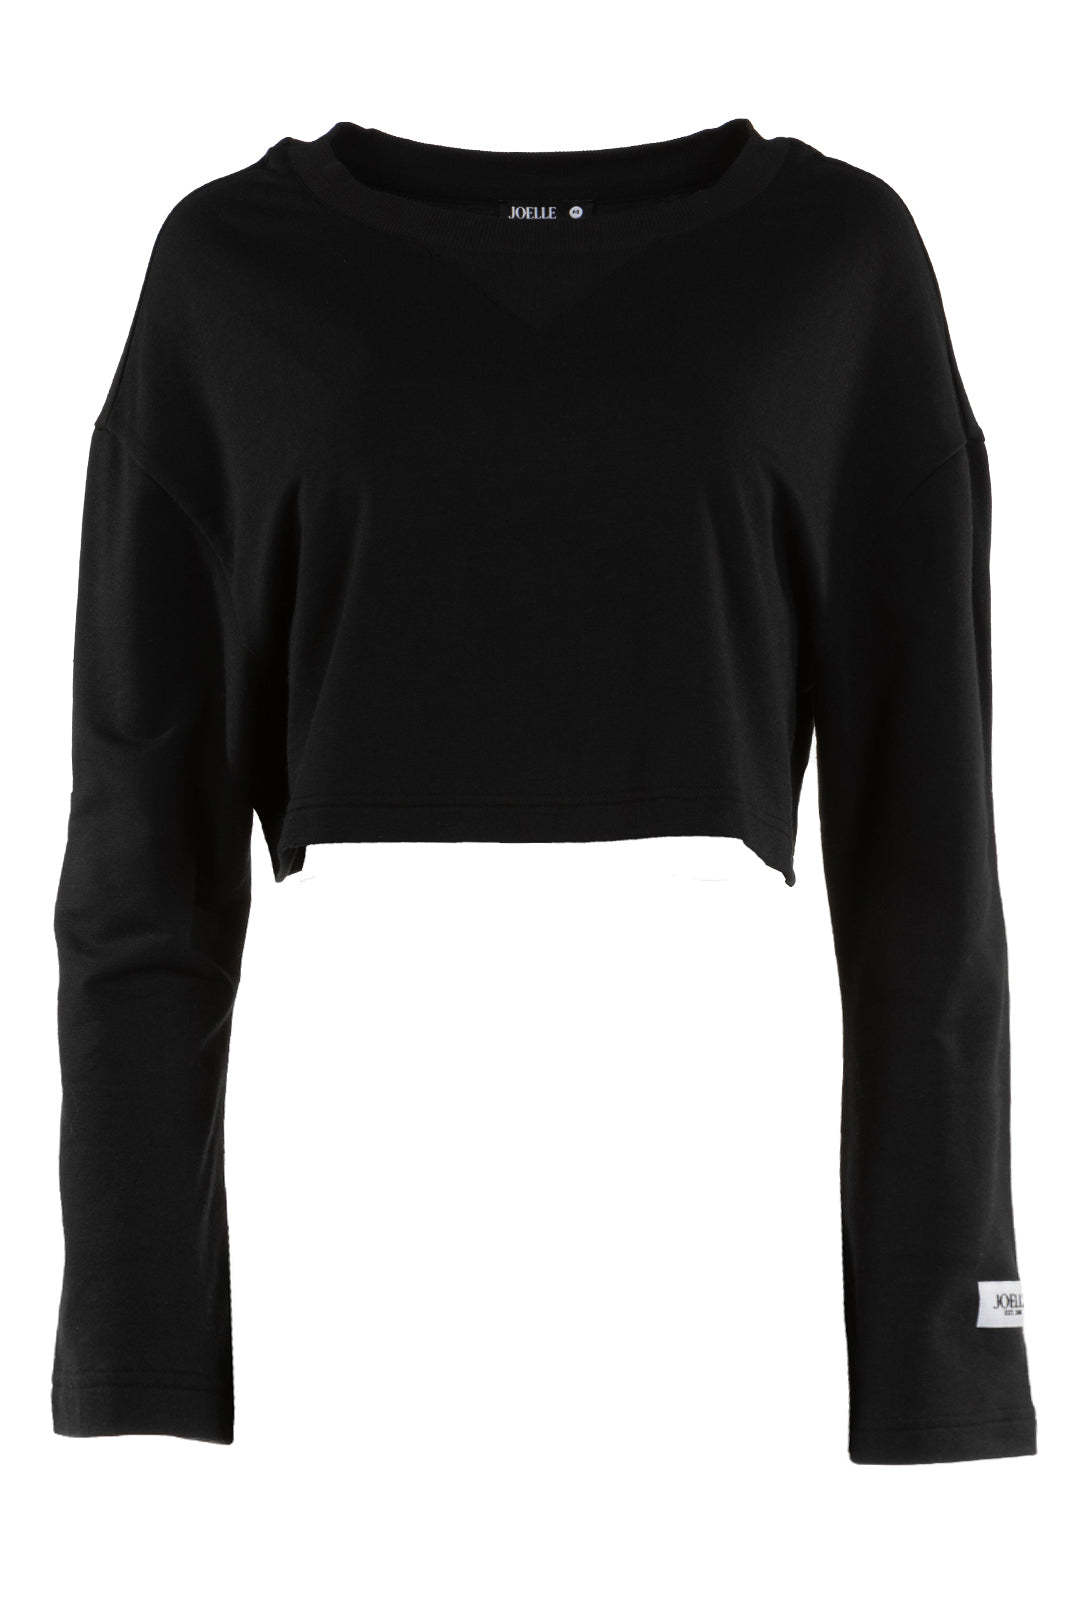 Short black sweater with long sleeves | Cristopher